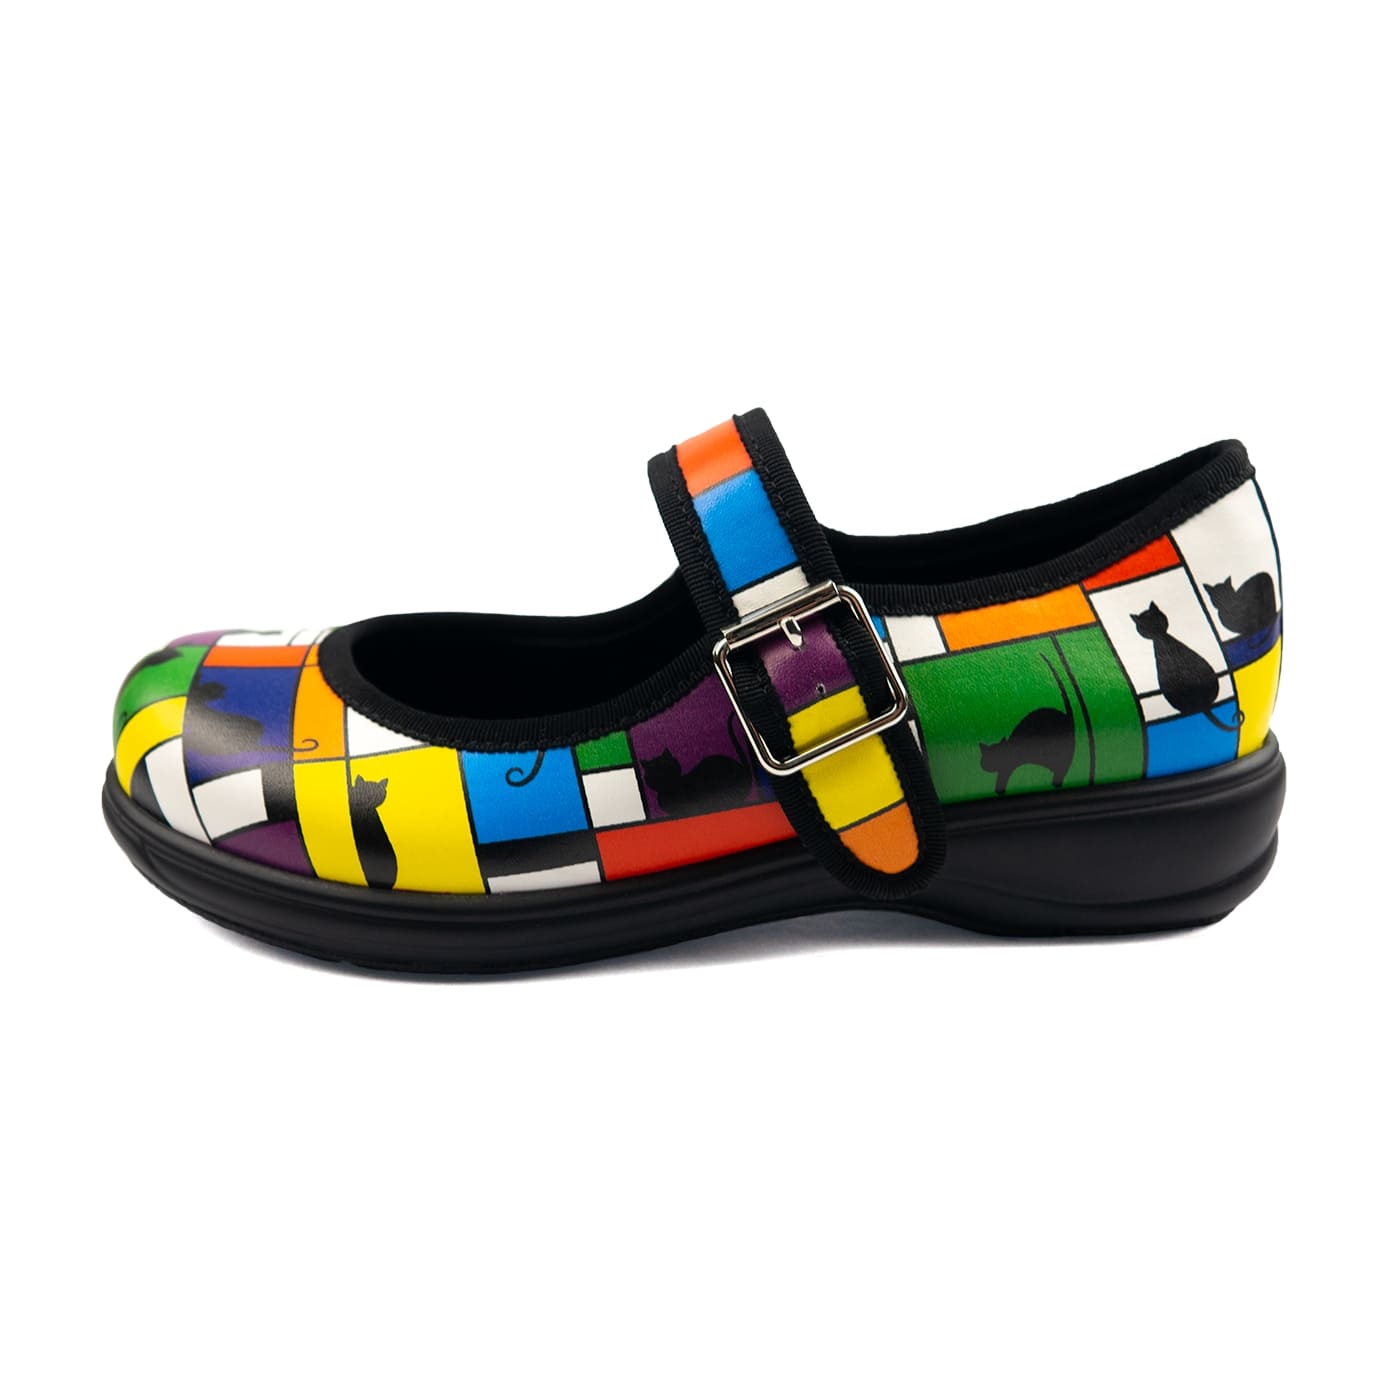 Intrigue Mary Janes by RainbowsAndFairies.com.au (Black Cats - Mondrian Art - Partridge Family - Buckle Shoes - Mismatched Shoes - Cute & Comfy) - SKU: FW_MARYJ_INTRG_ORG - Pic-03